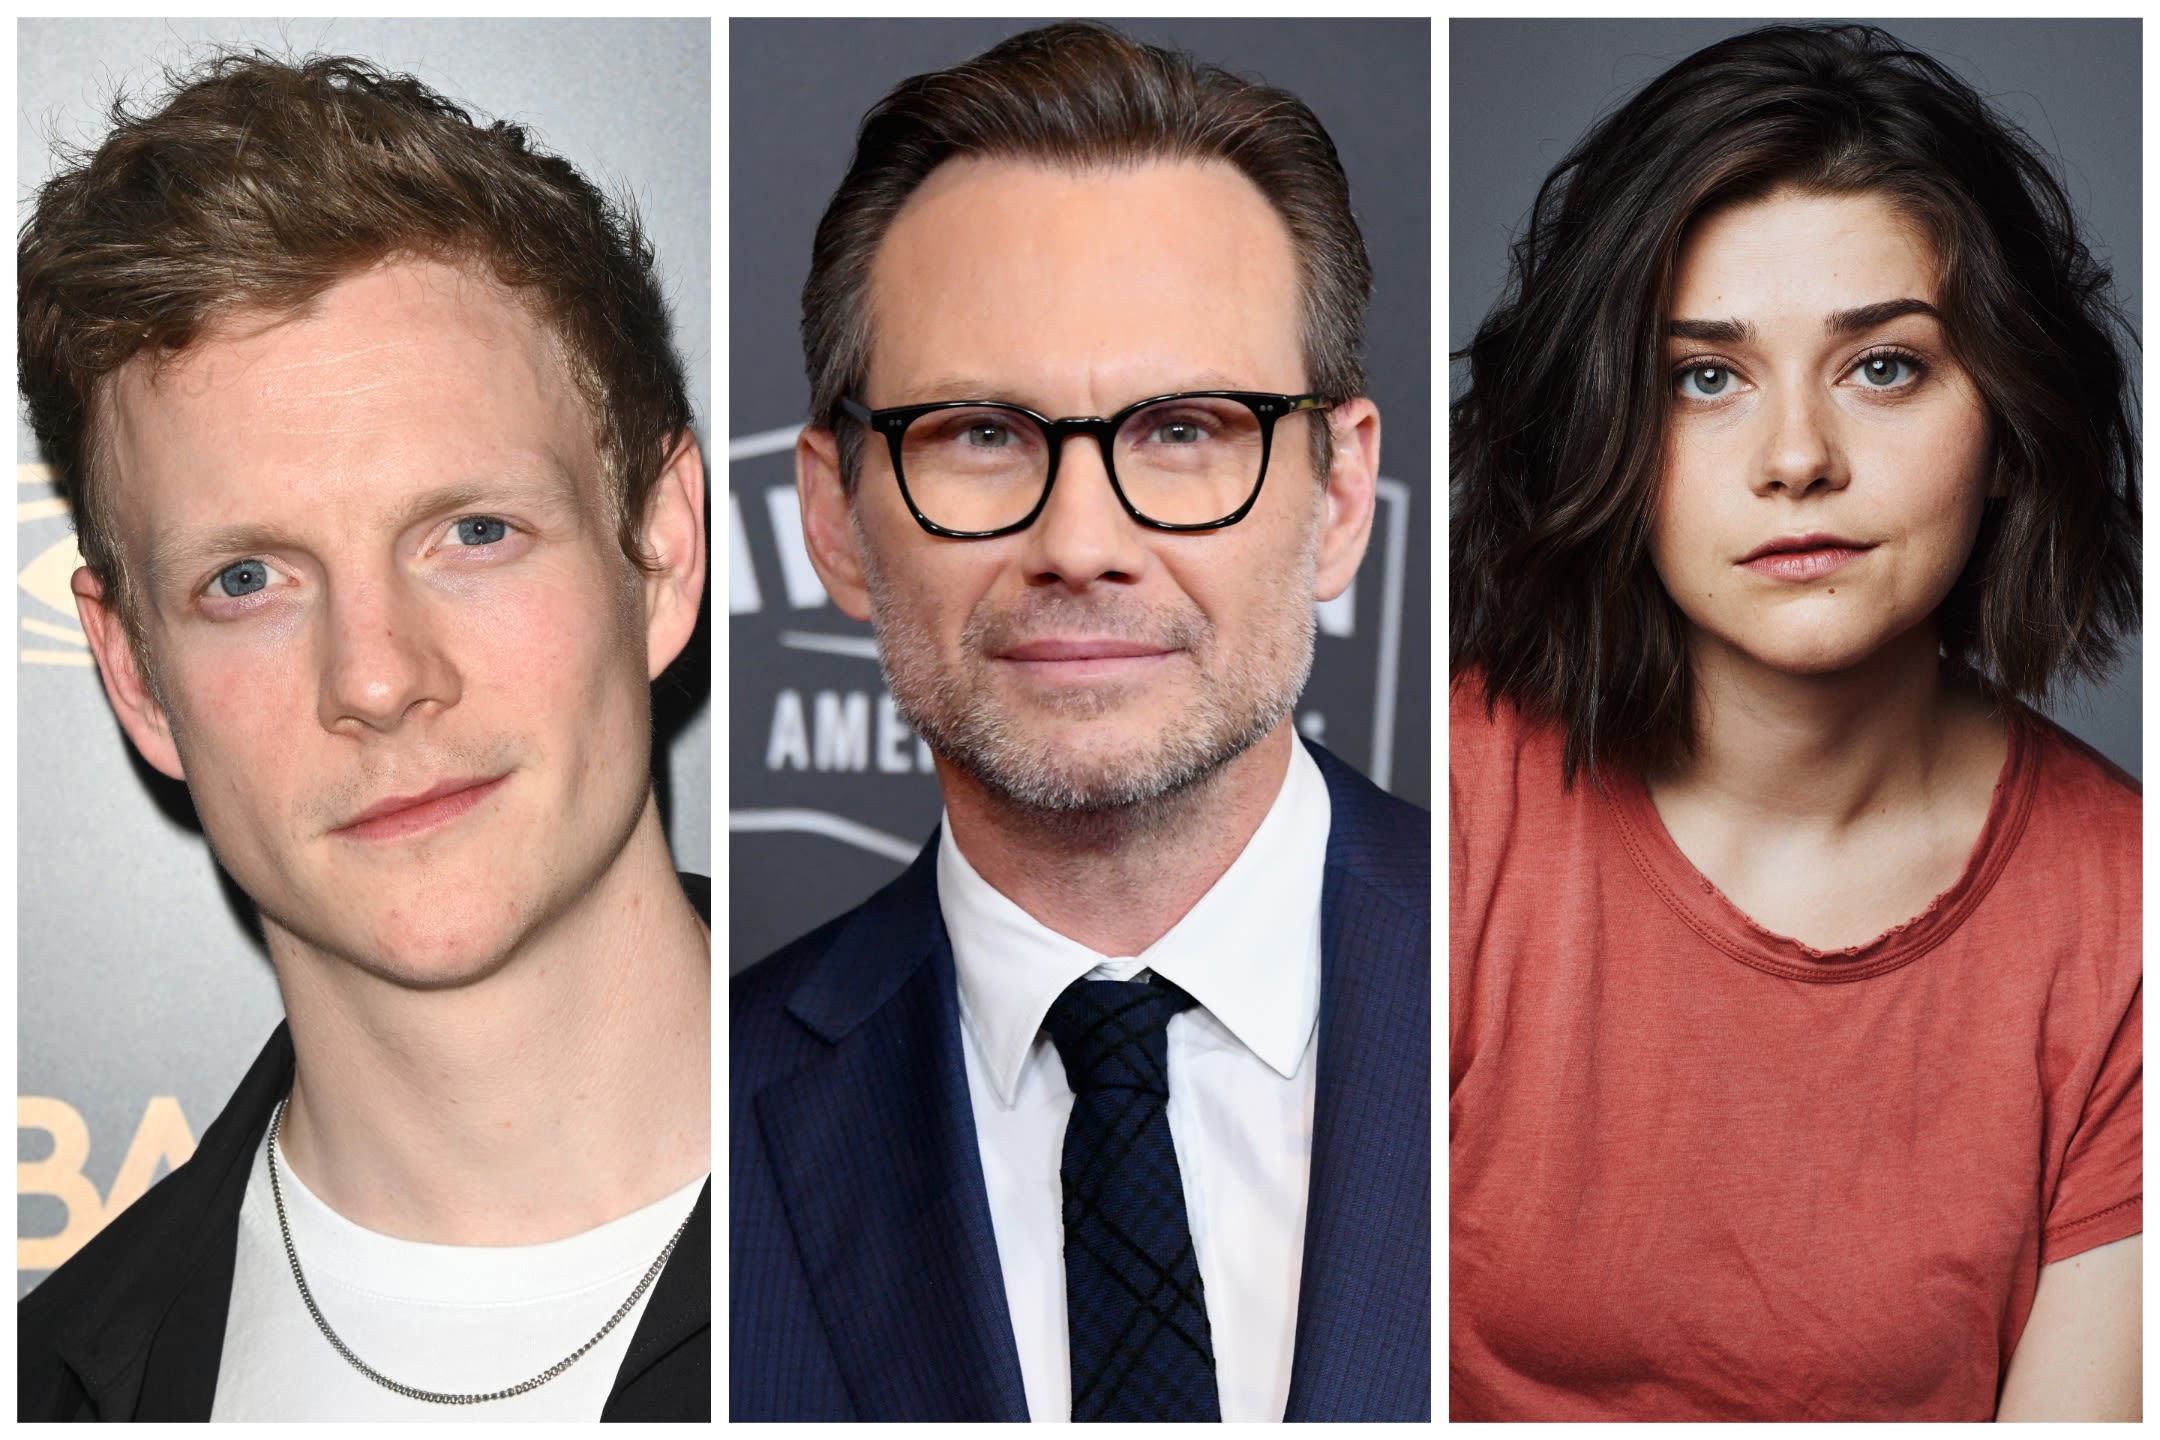 ‘Dexter’ Prequel Series Casts Patrick Gibson, Christian Slater, Molly Brown in Lead Roles